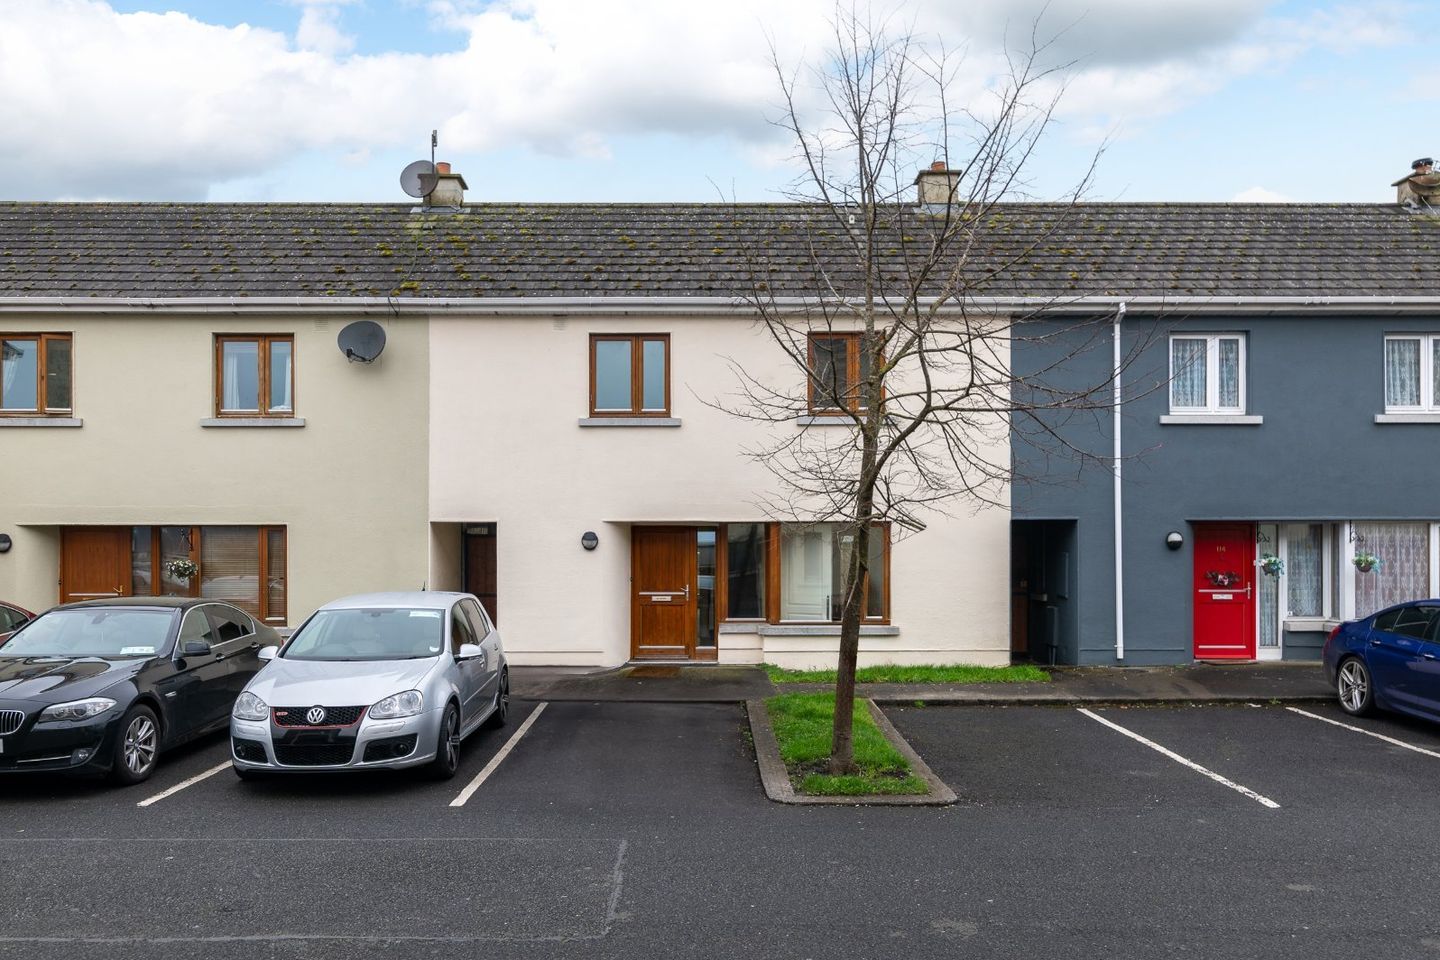 115 Church Hill, Tullamore, Co. Offaly, R35K2F9